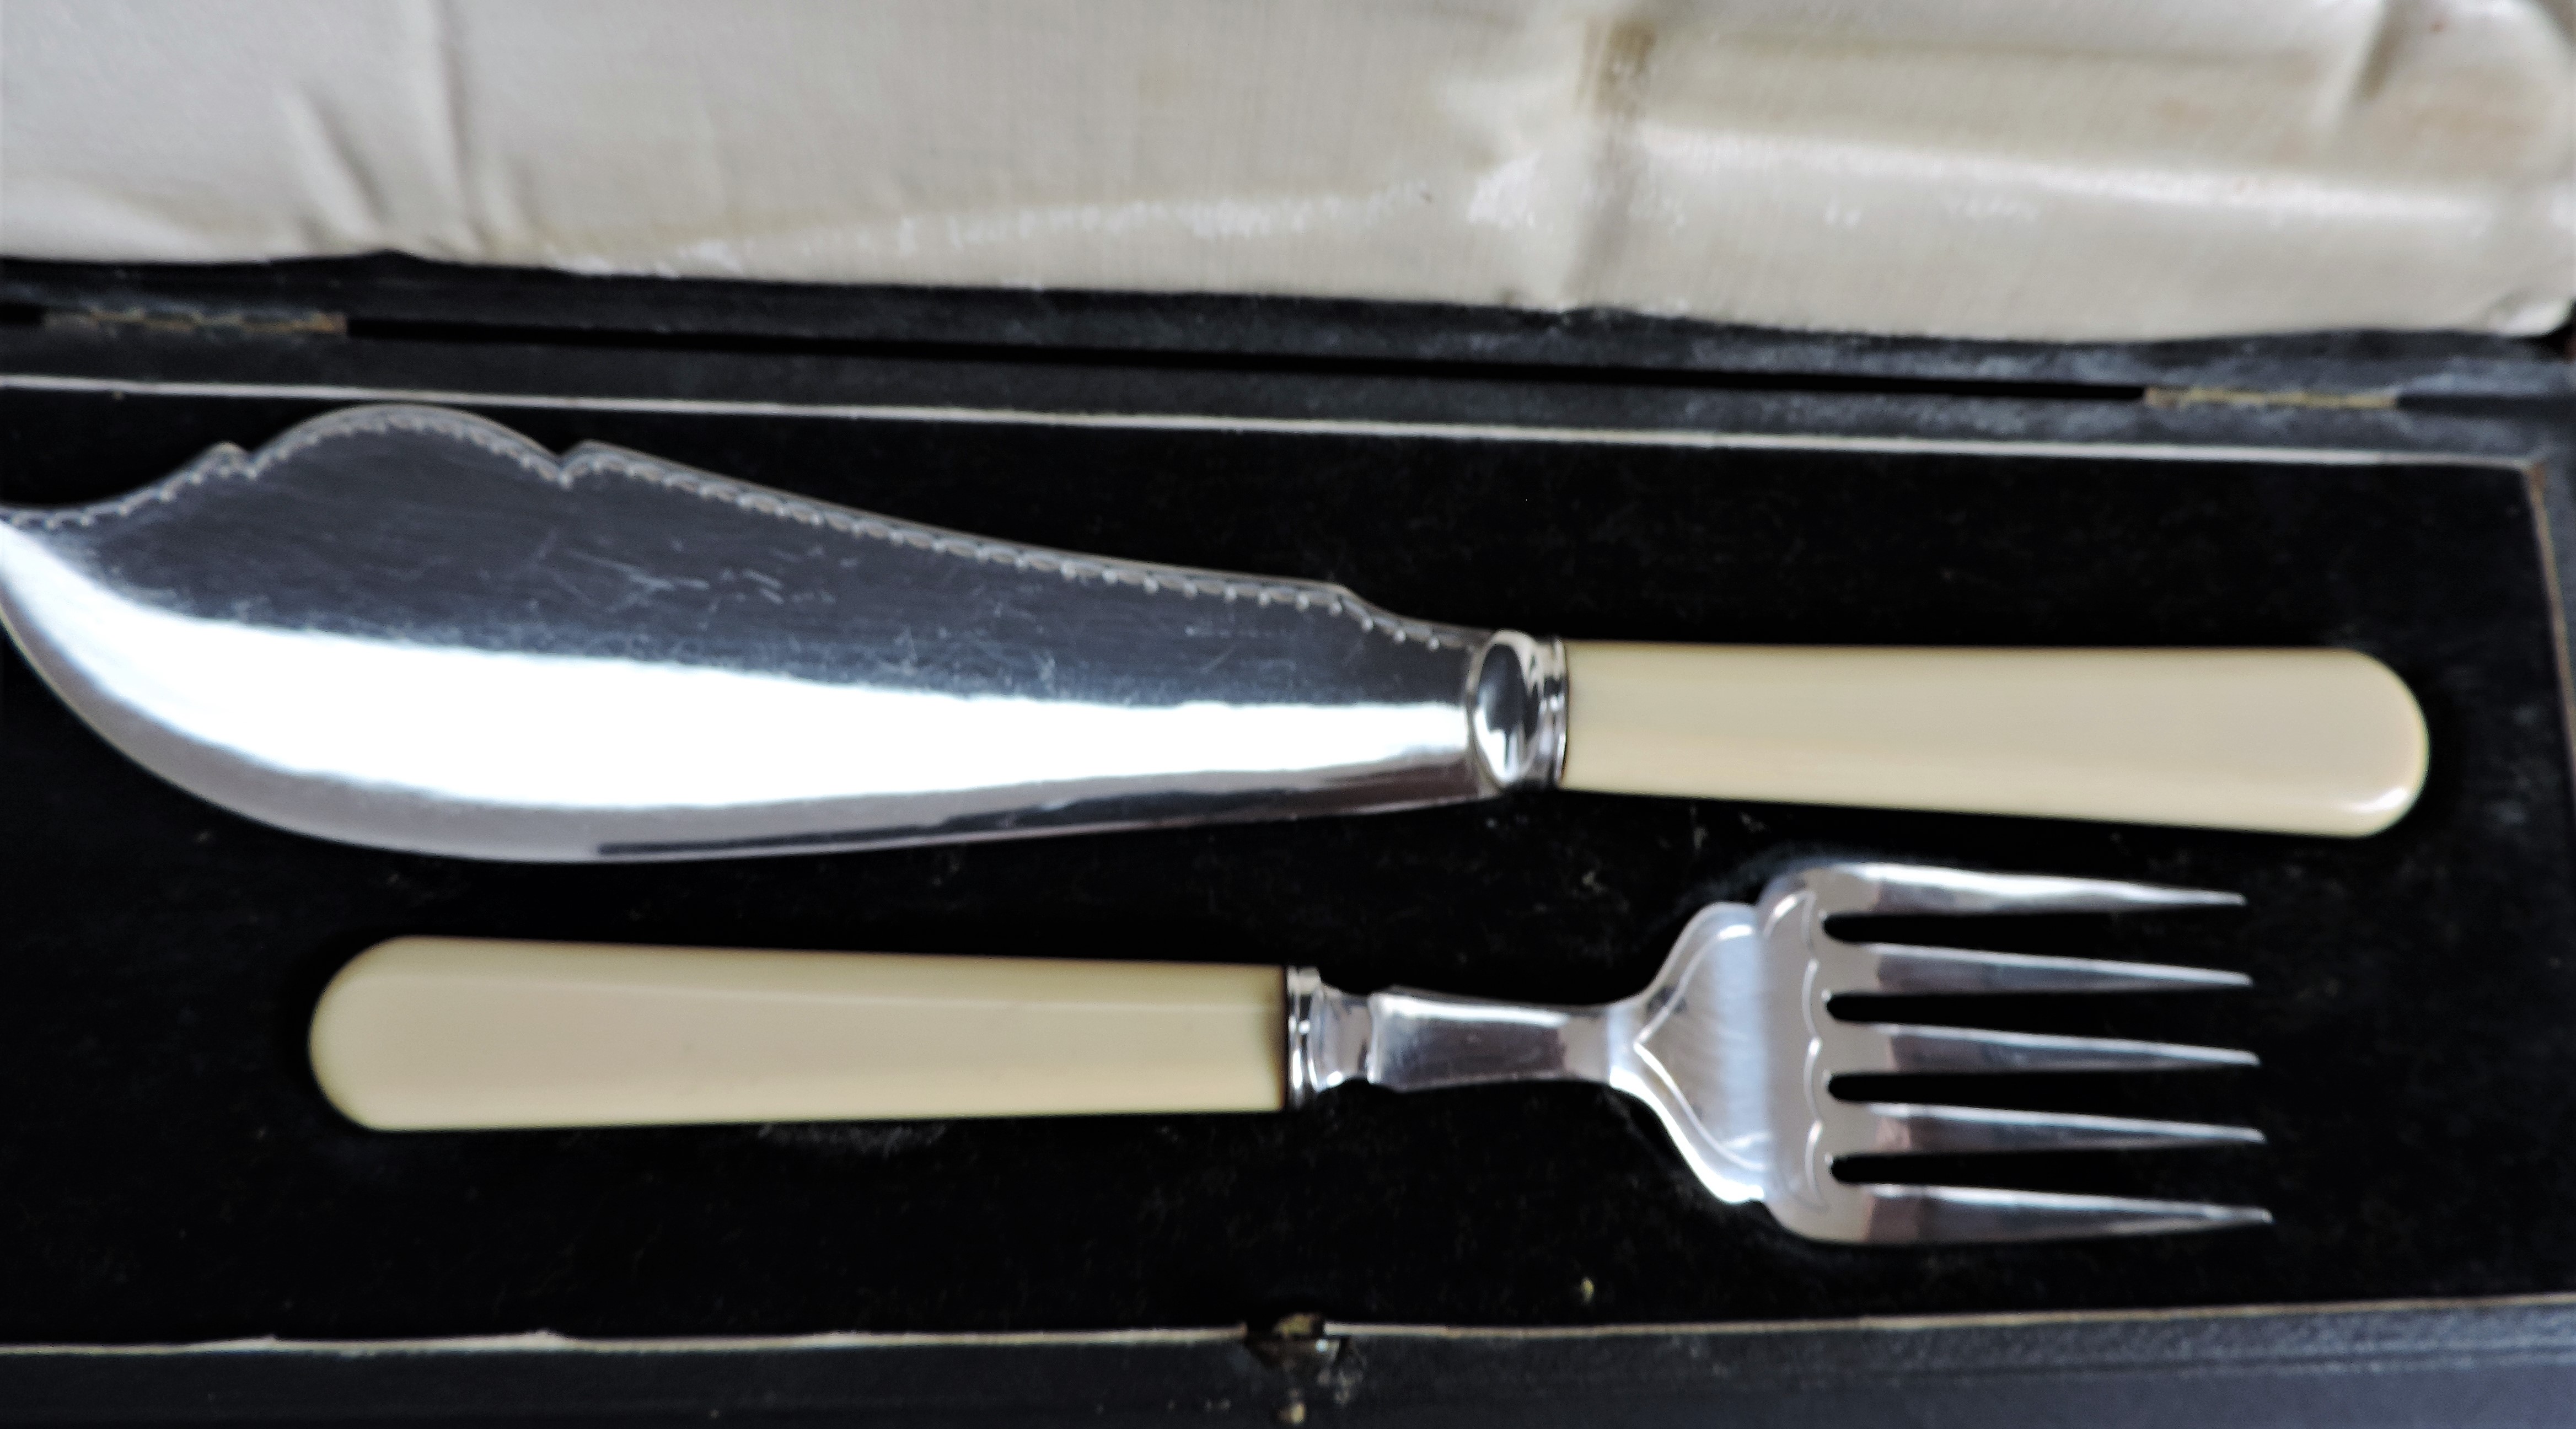 Vintage Silver Plated Fish Servers - Image 4 of 4